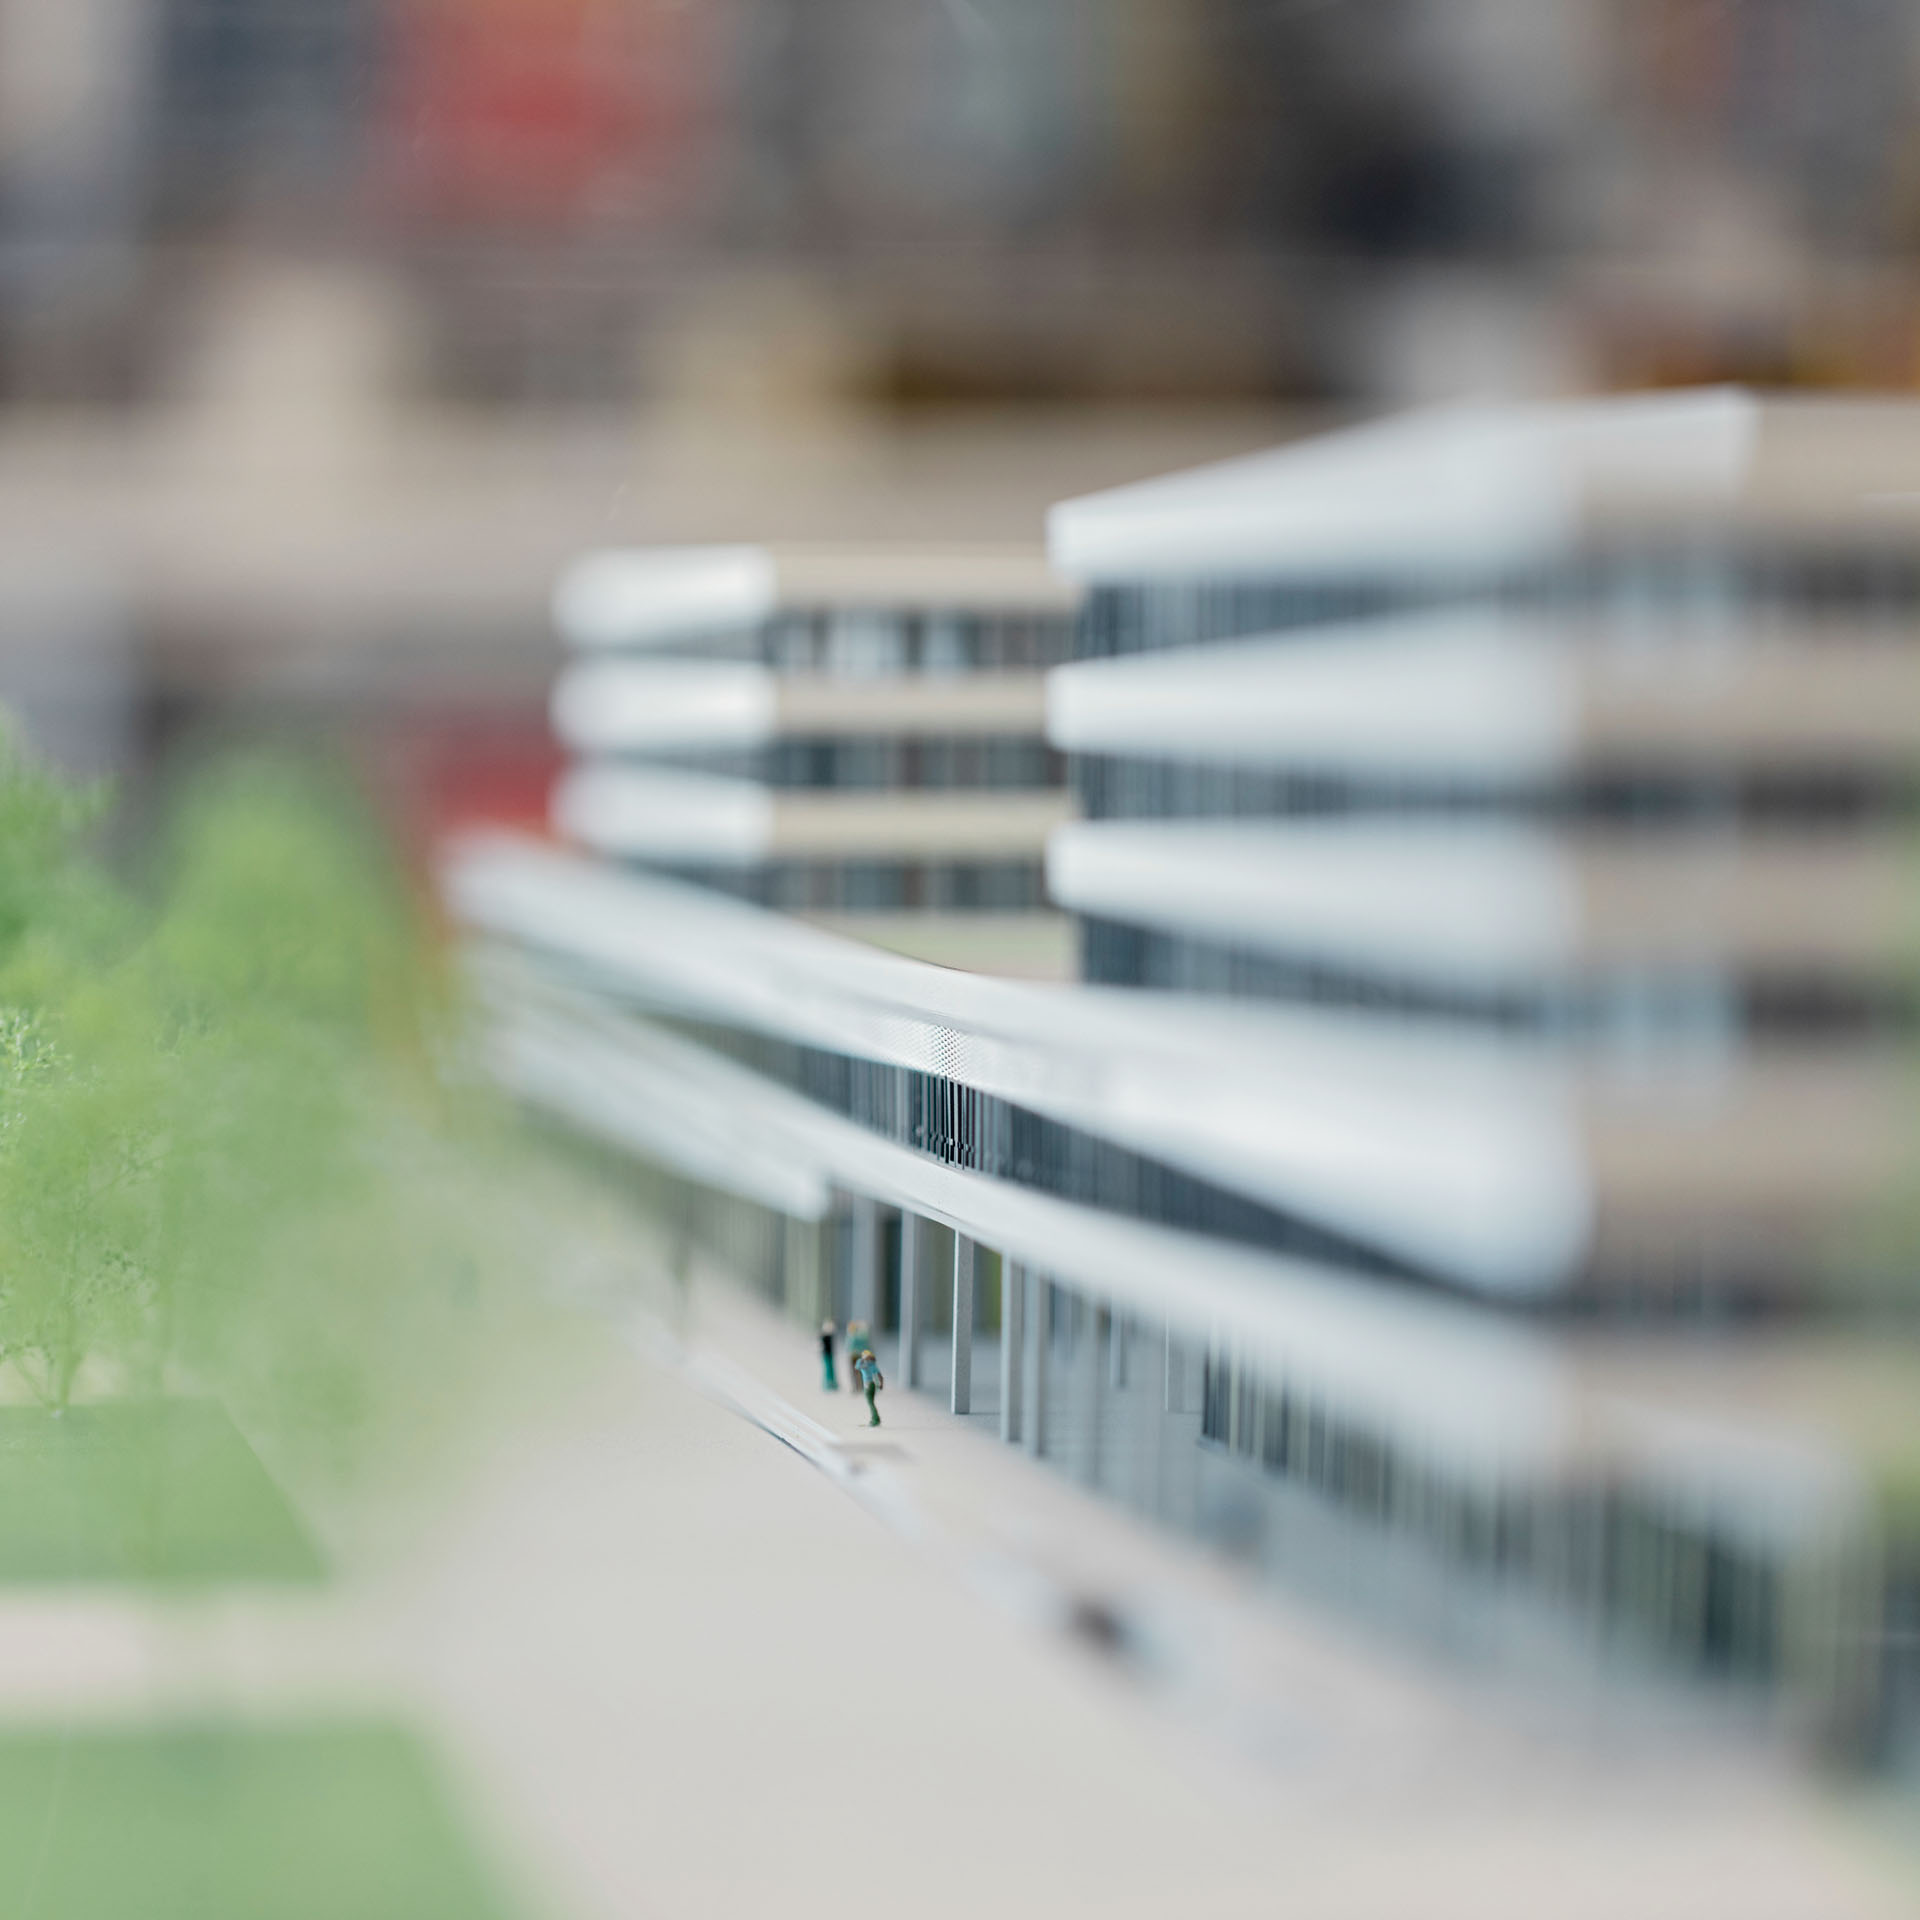 Blurred photography of a model of the X-Buildung at Bielefeld University